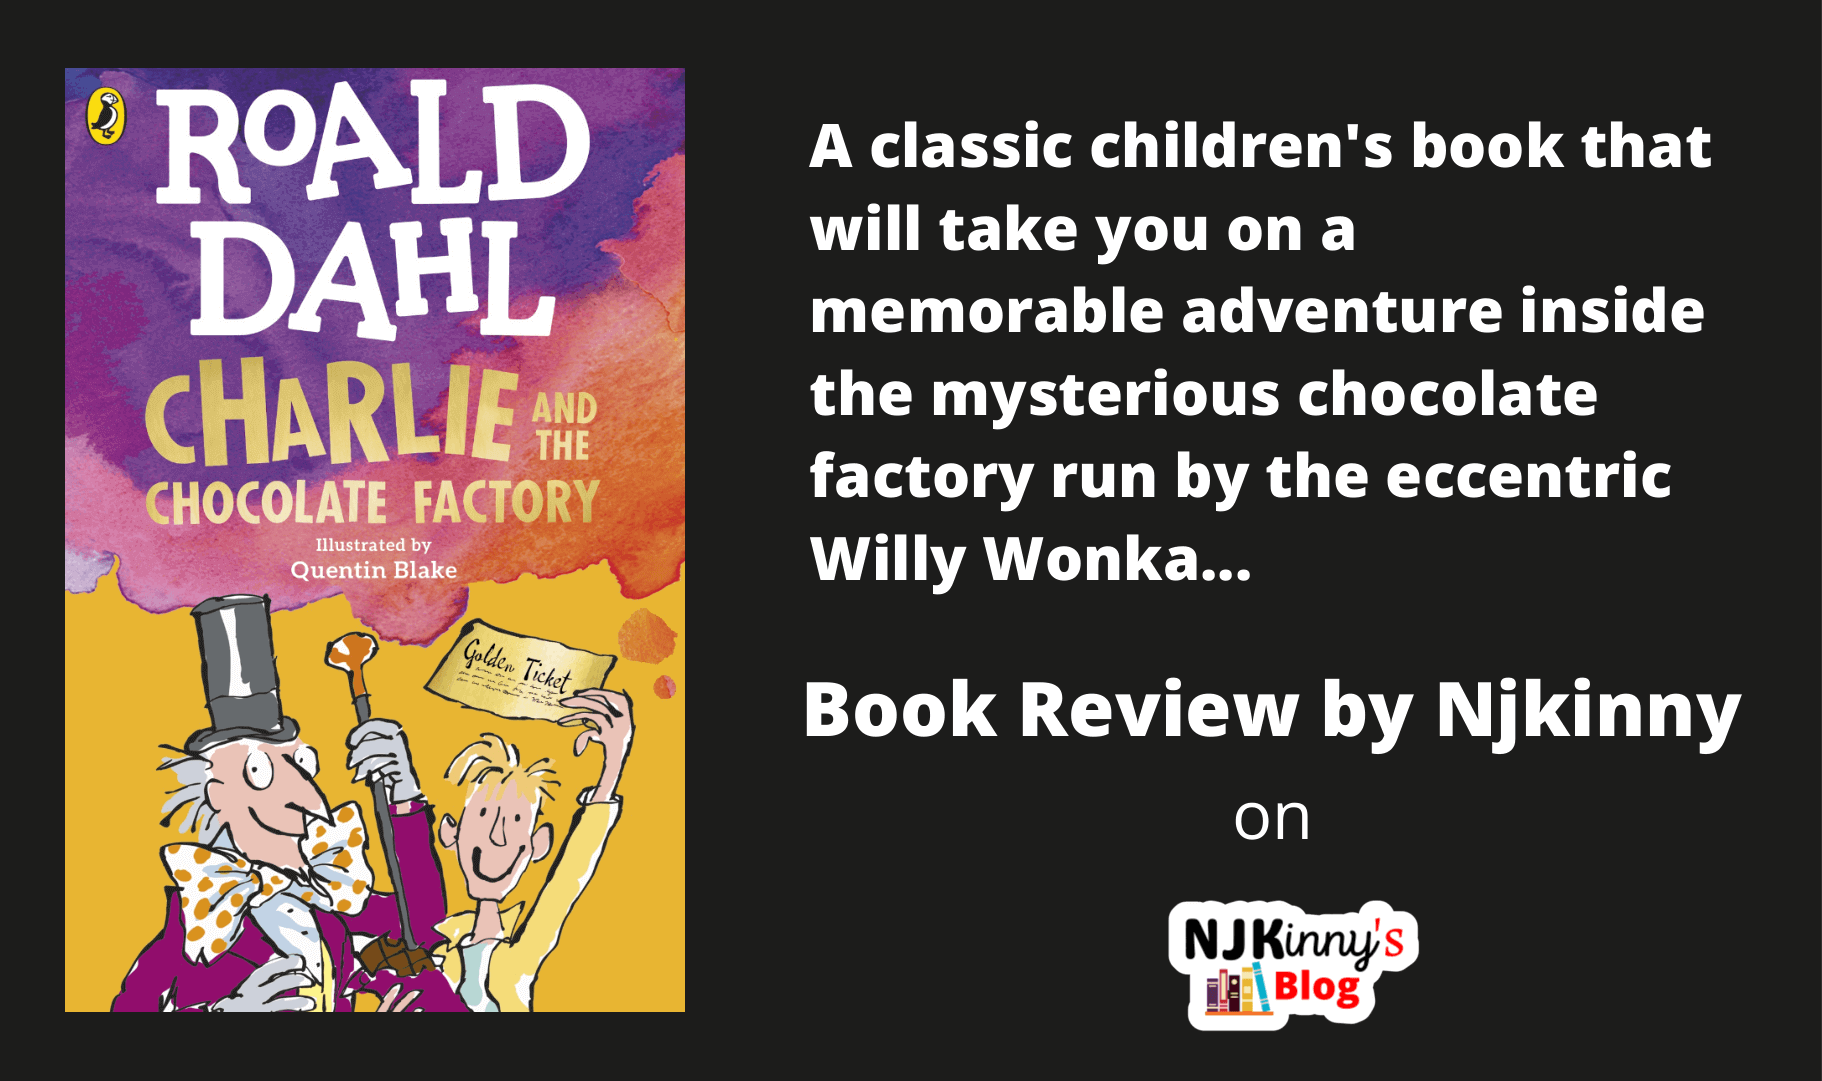 charlie and the chocolate factory story book review